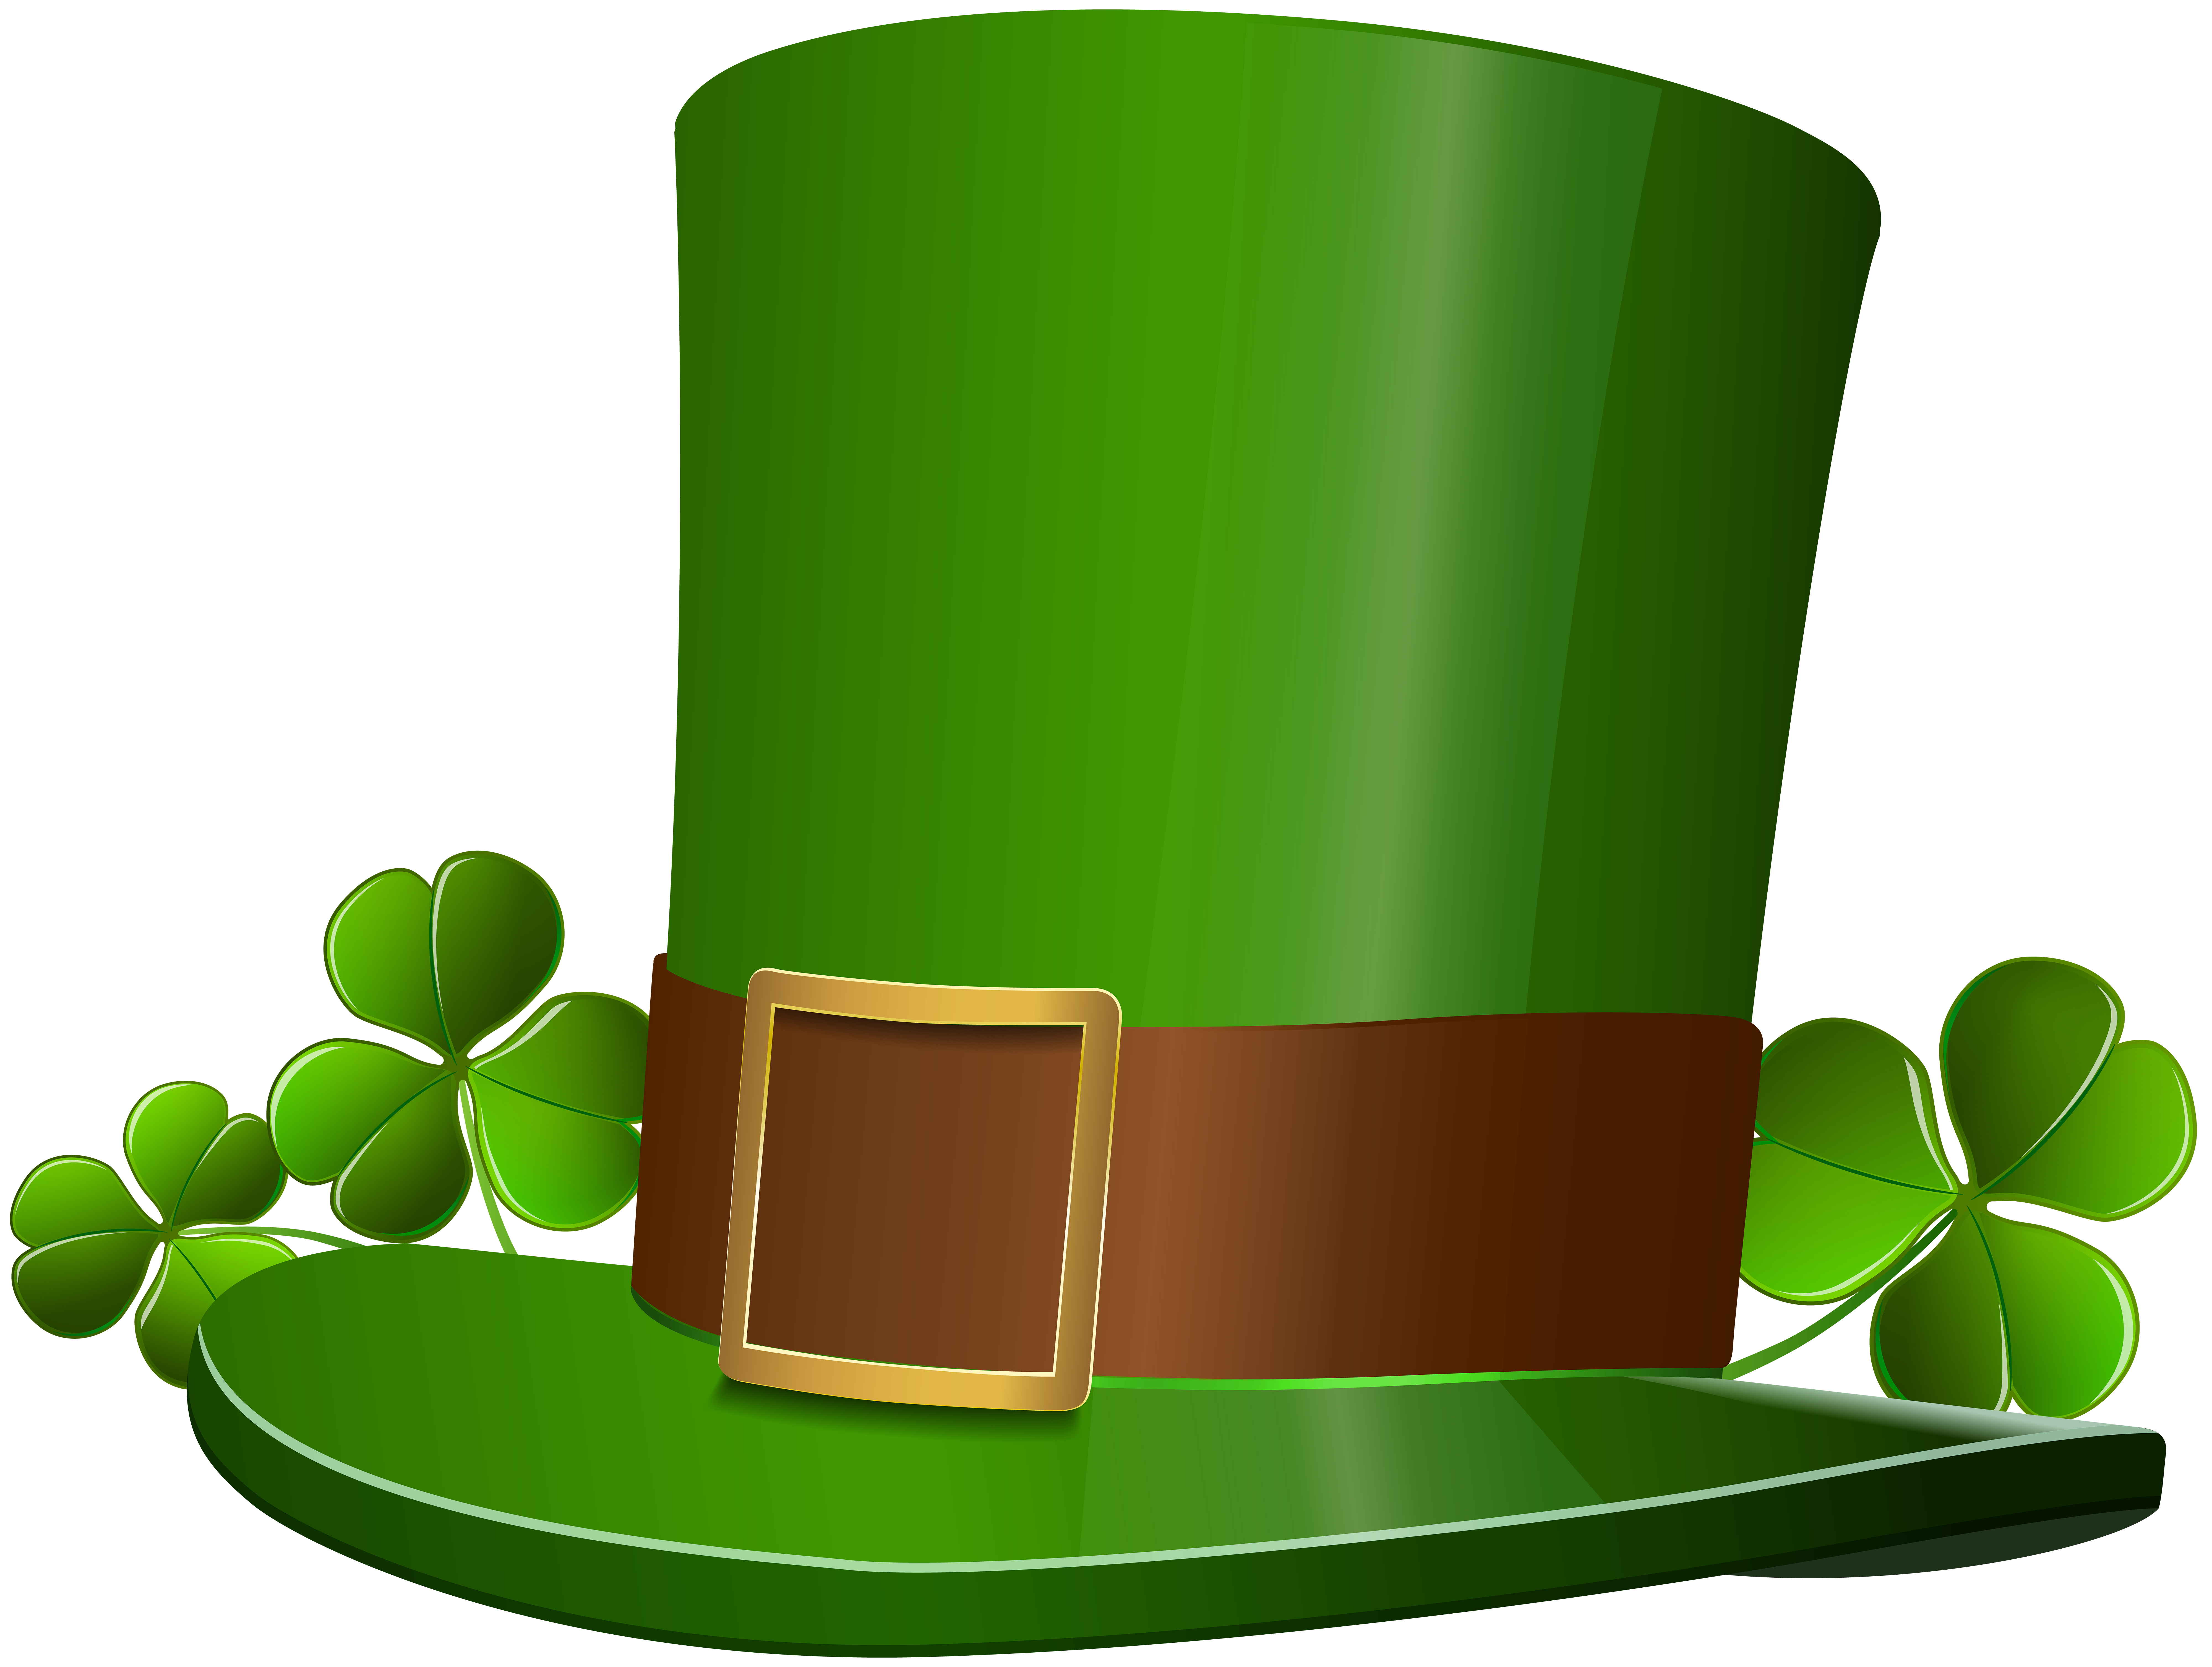 Green hat png clip art image gallery.